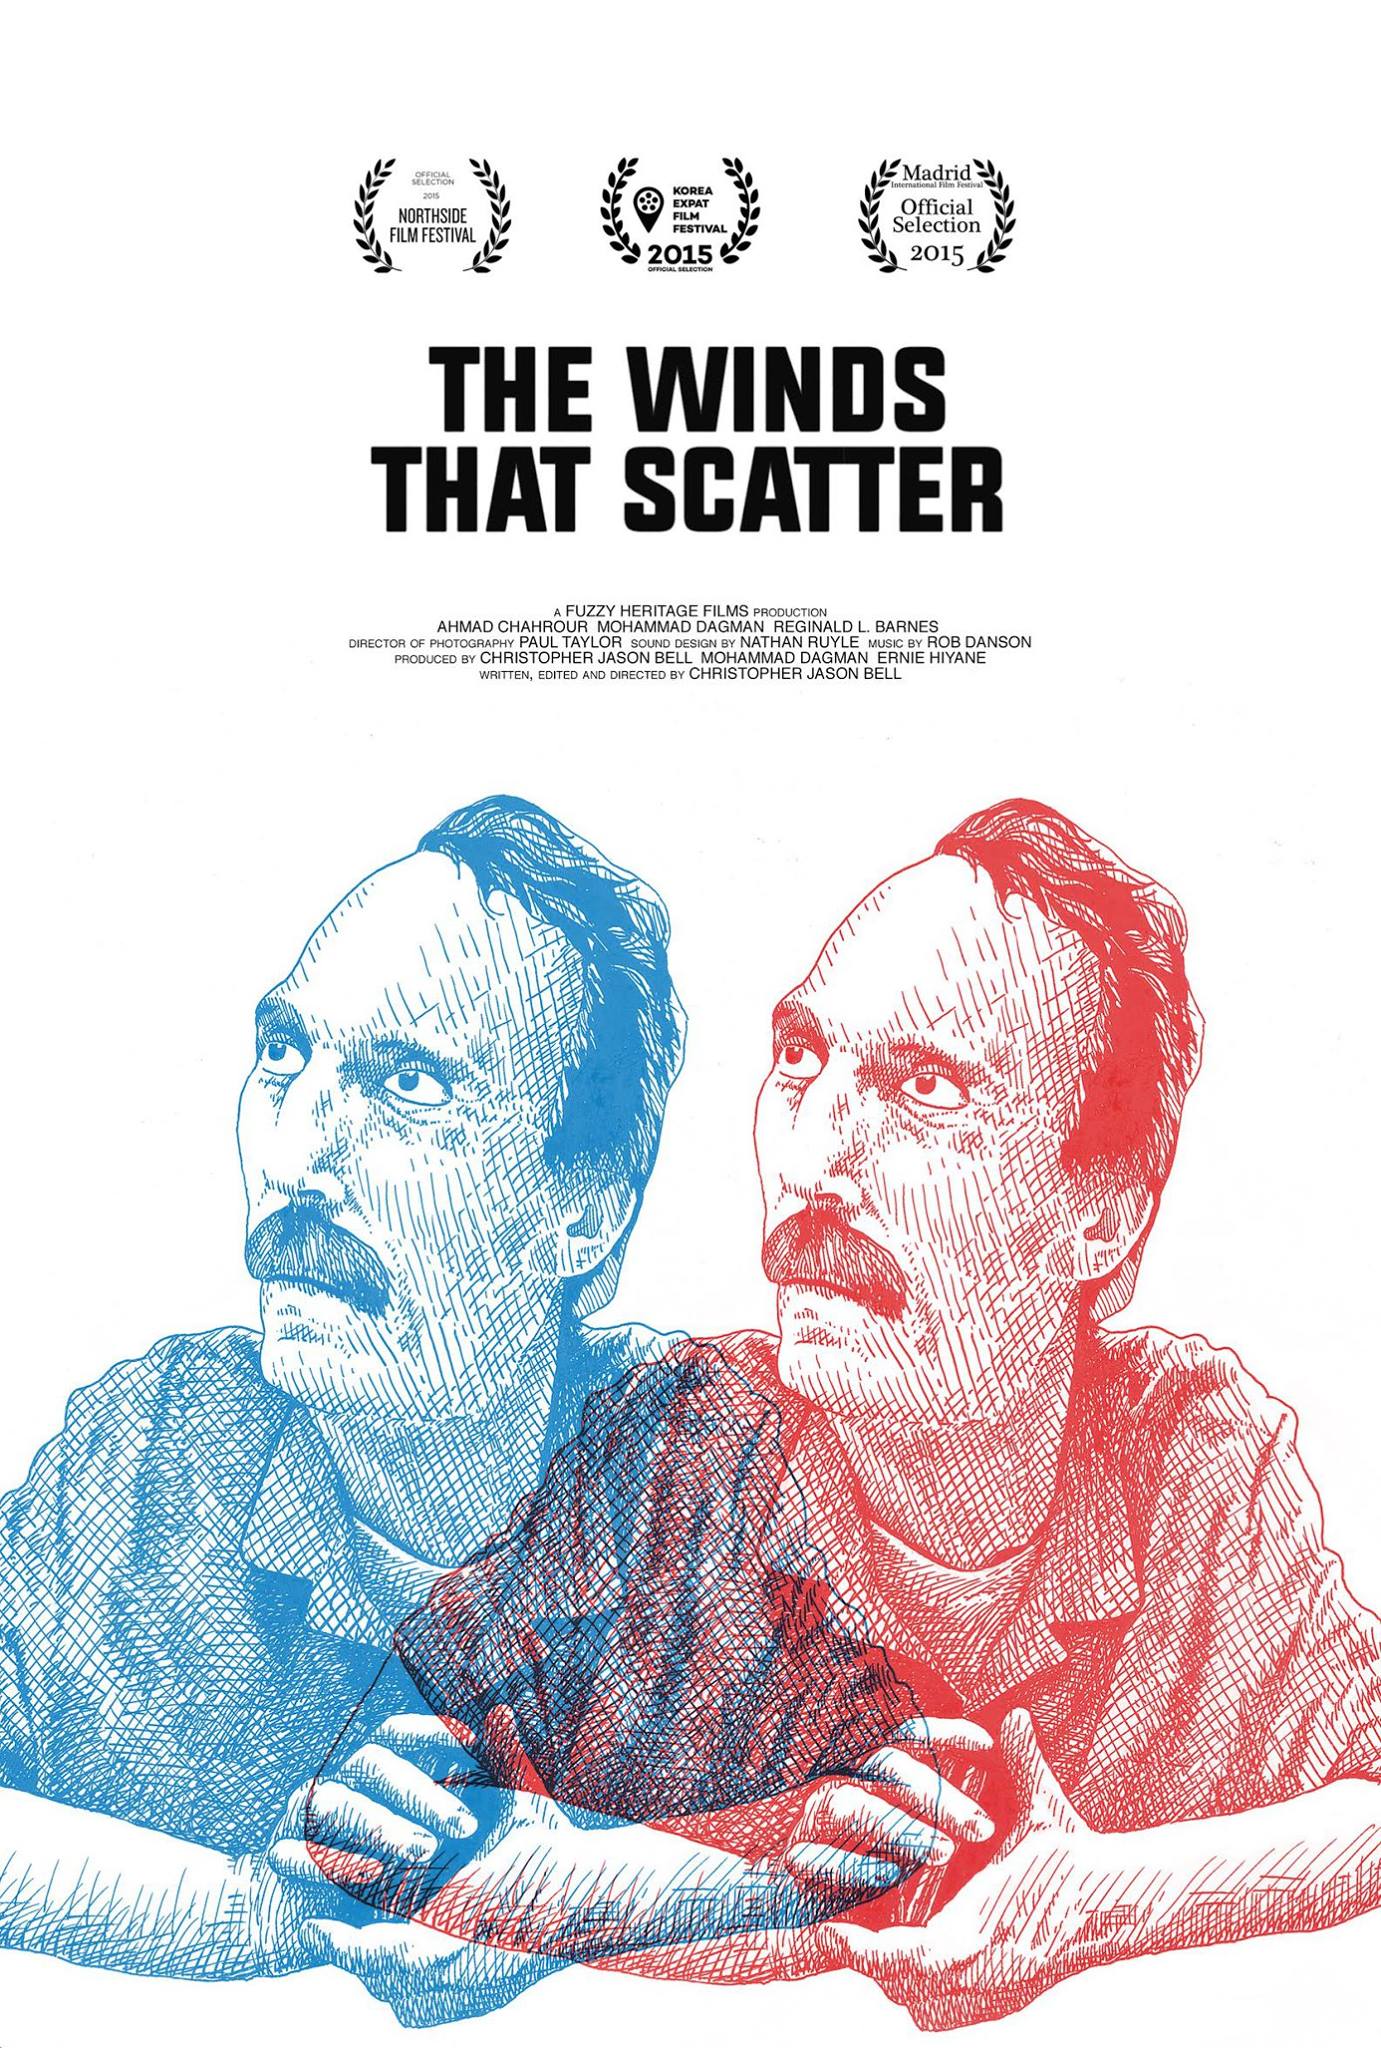 The Winds That Scatter.